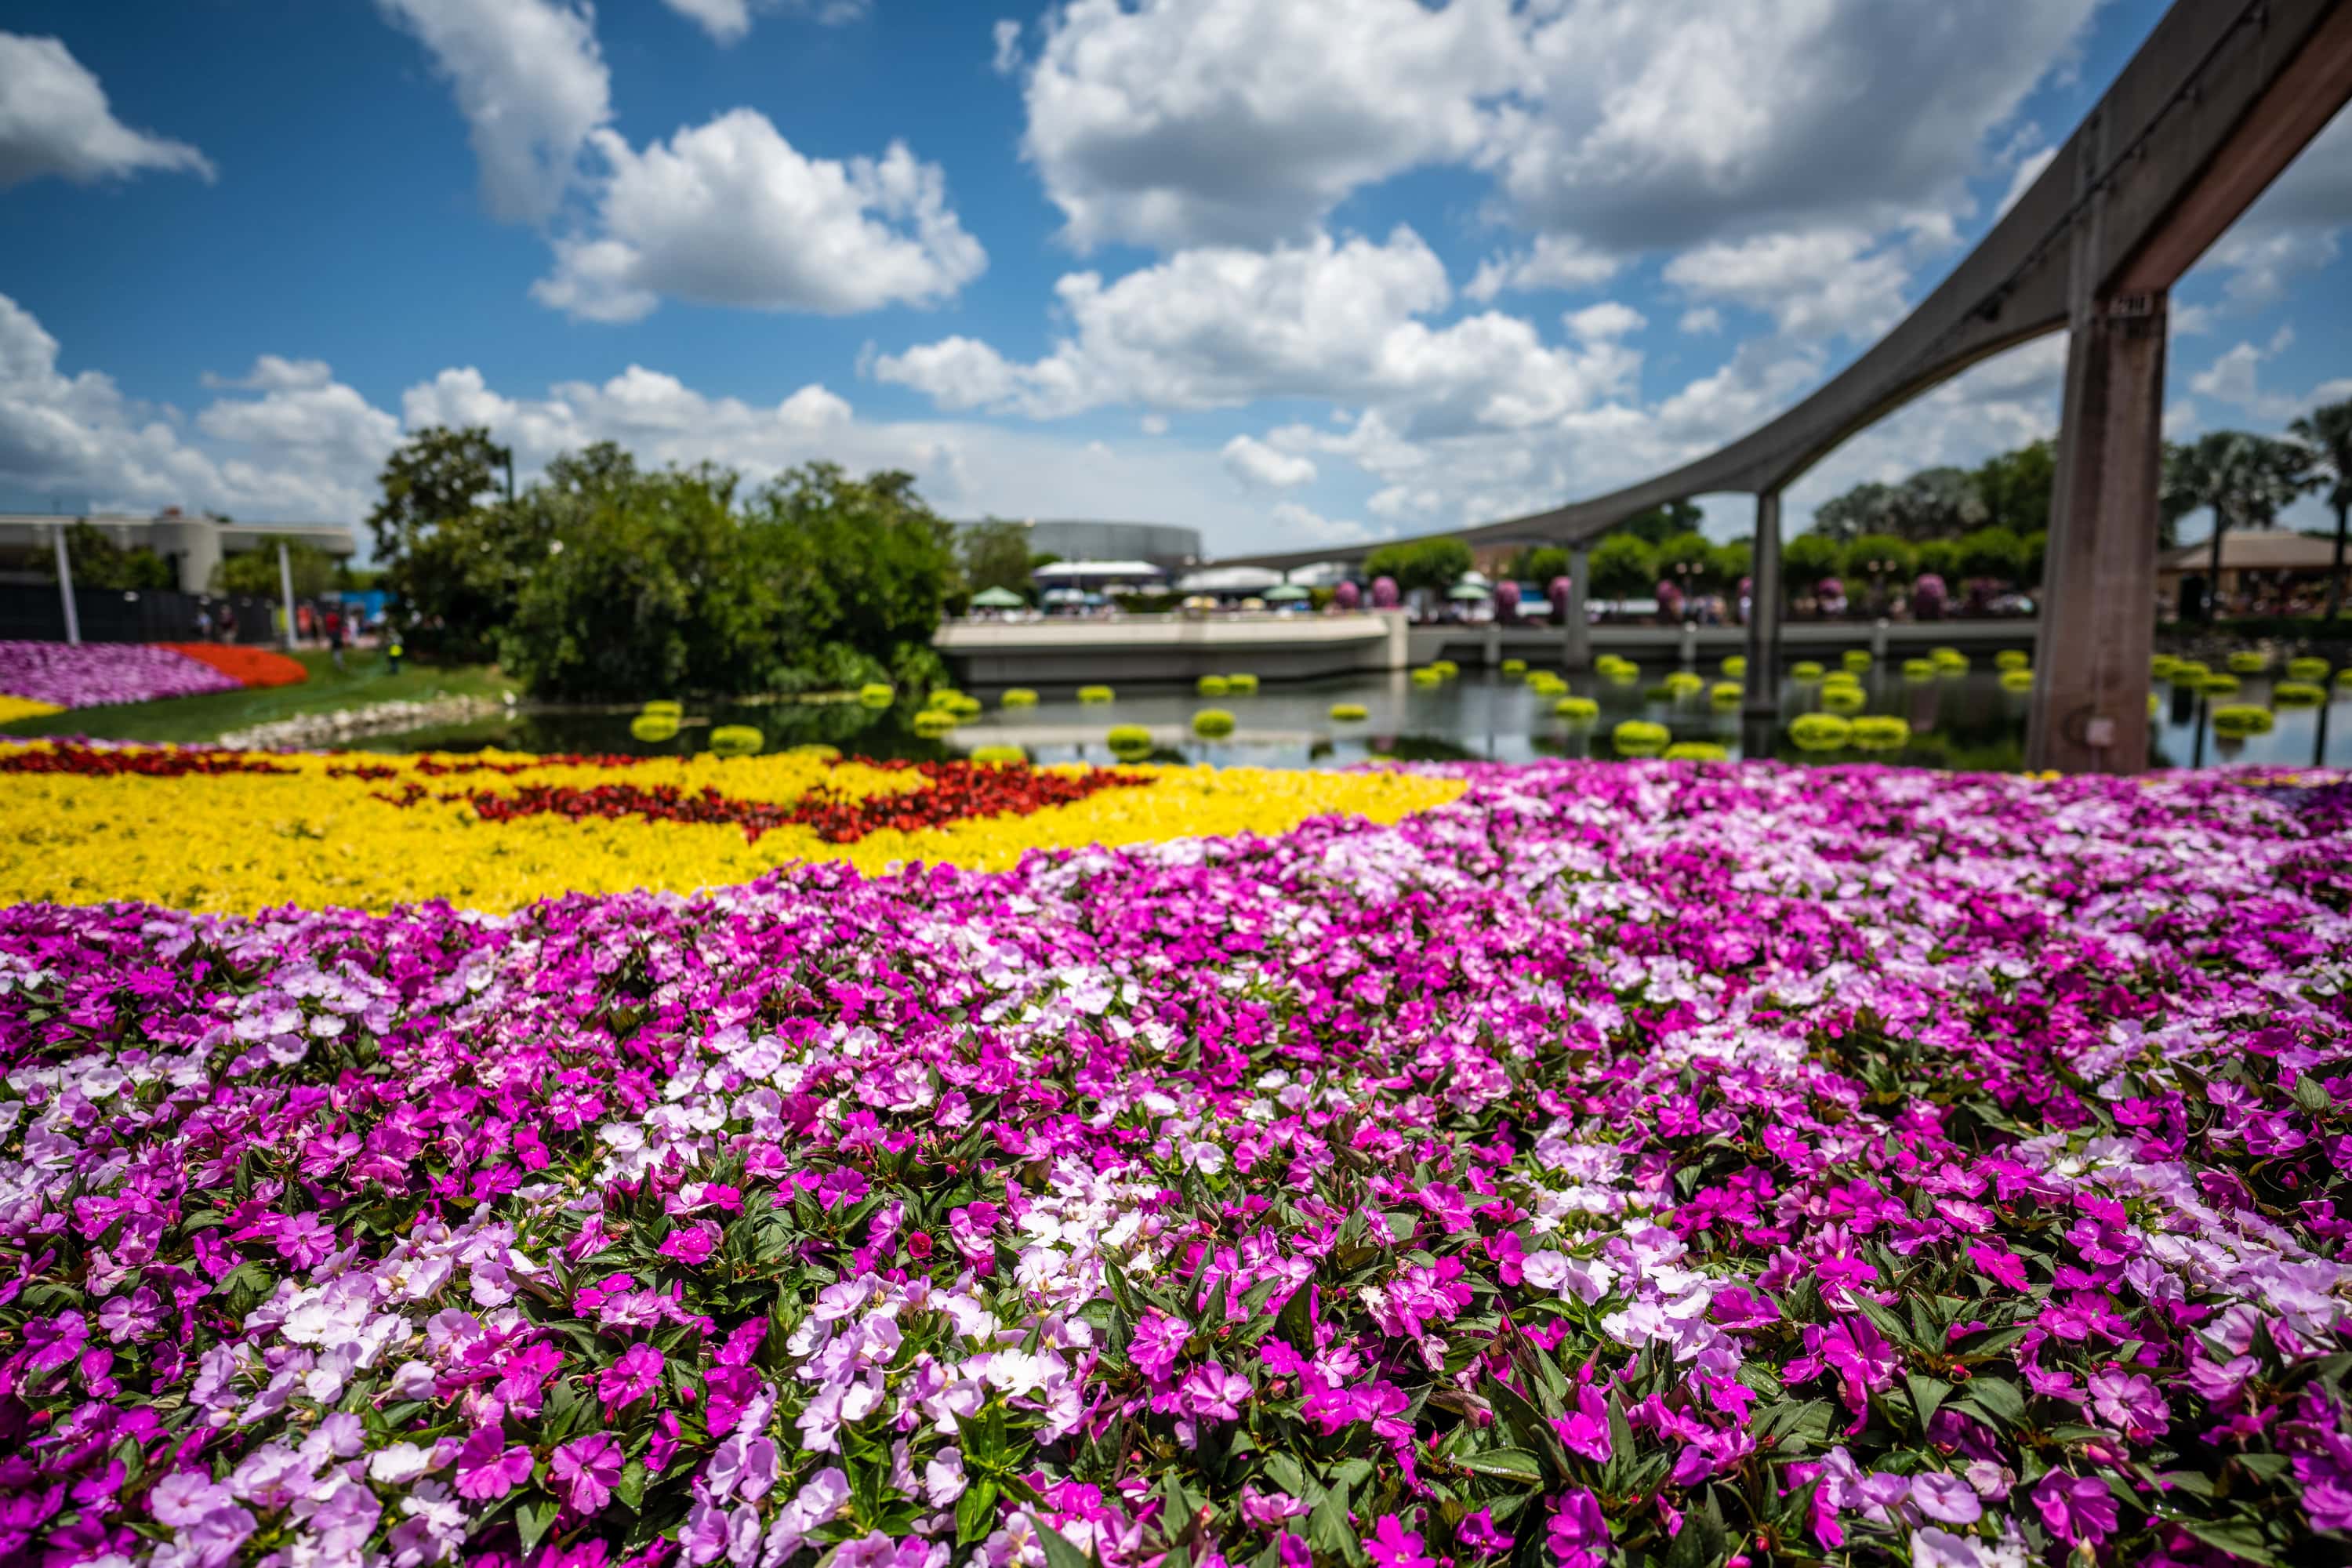 Photos of Flowers and Part of the Monorail Rails at Epcot